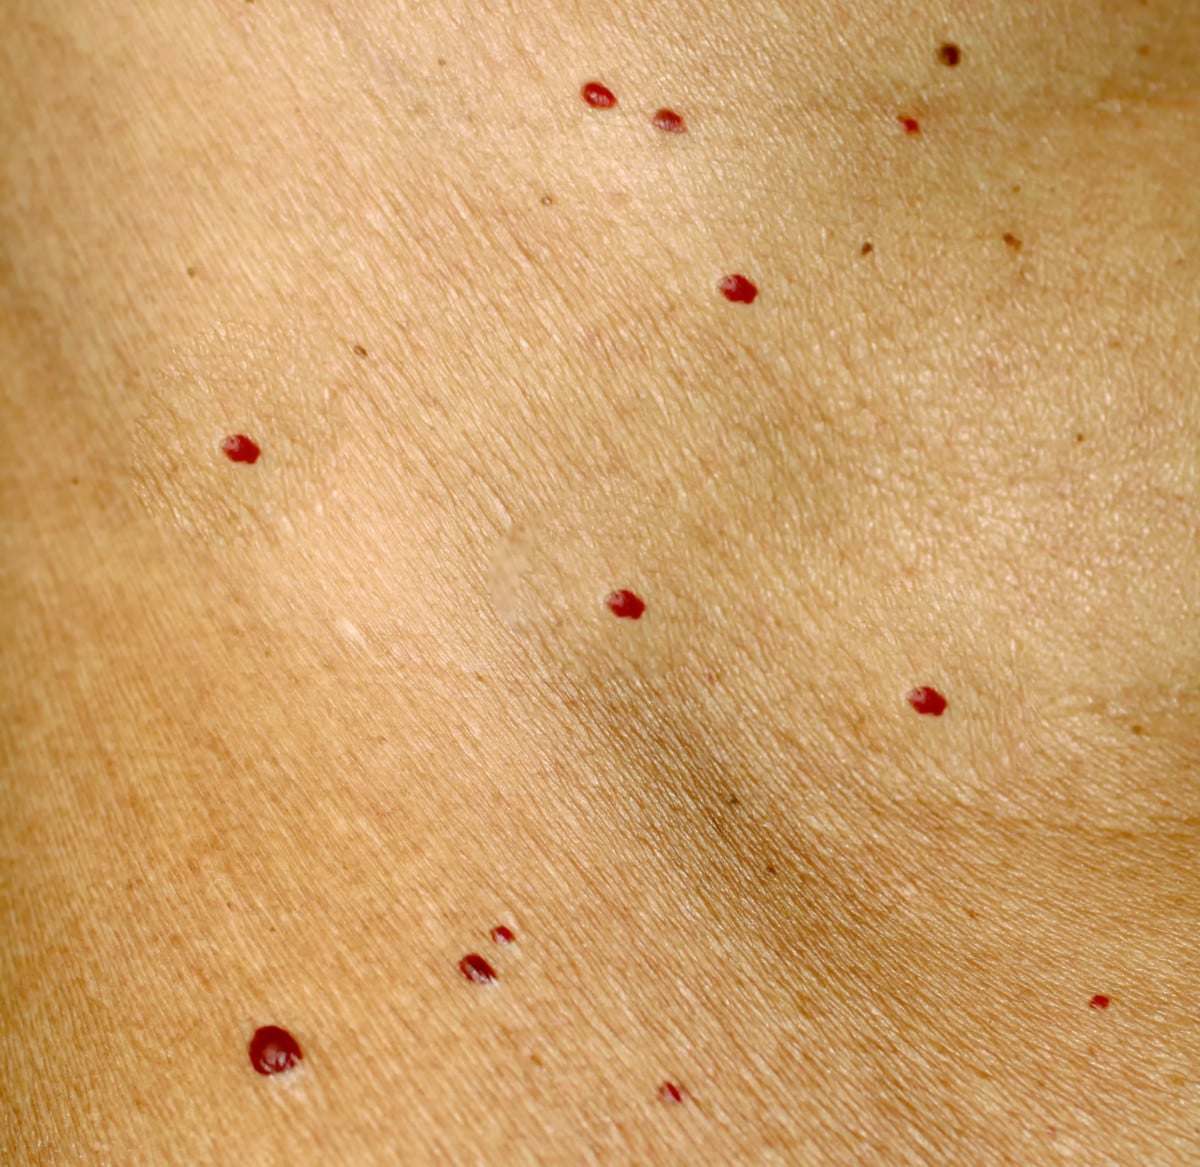 Red Dots on Skin: 19 Causes, Some Serious » Scary Symptoms